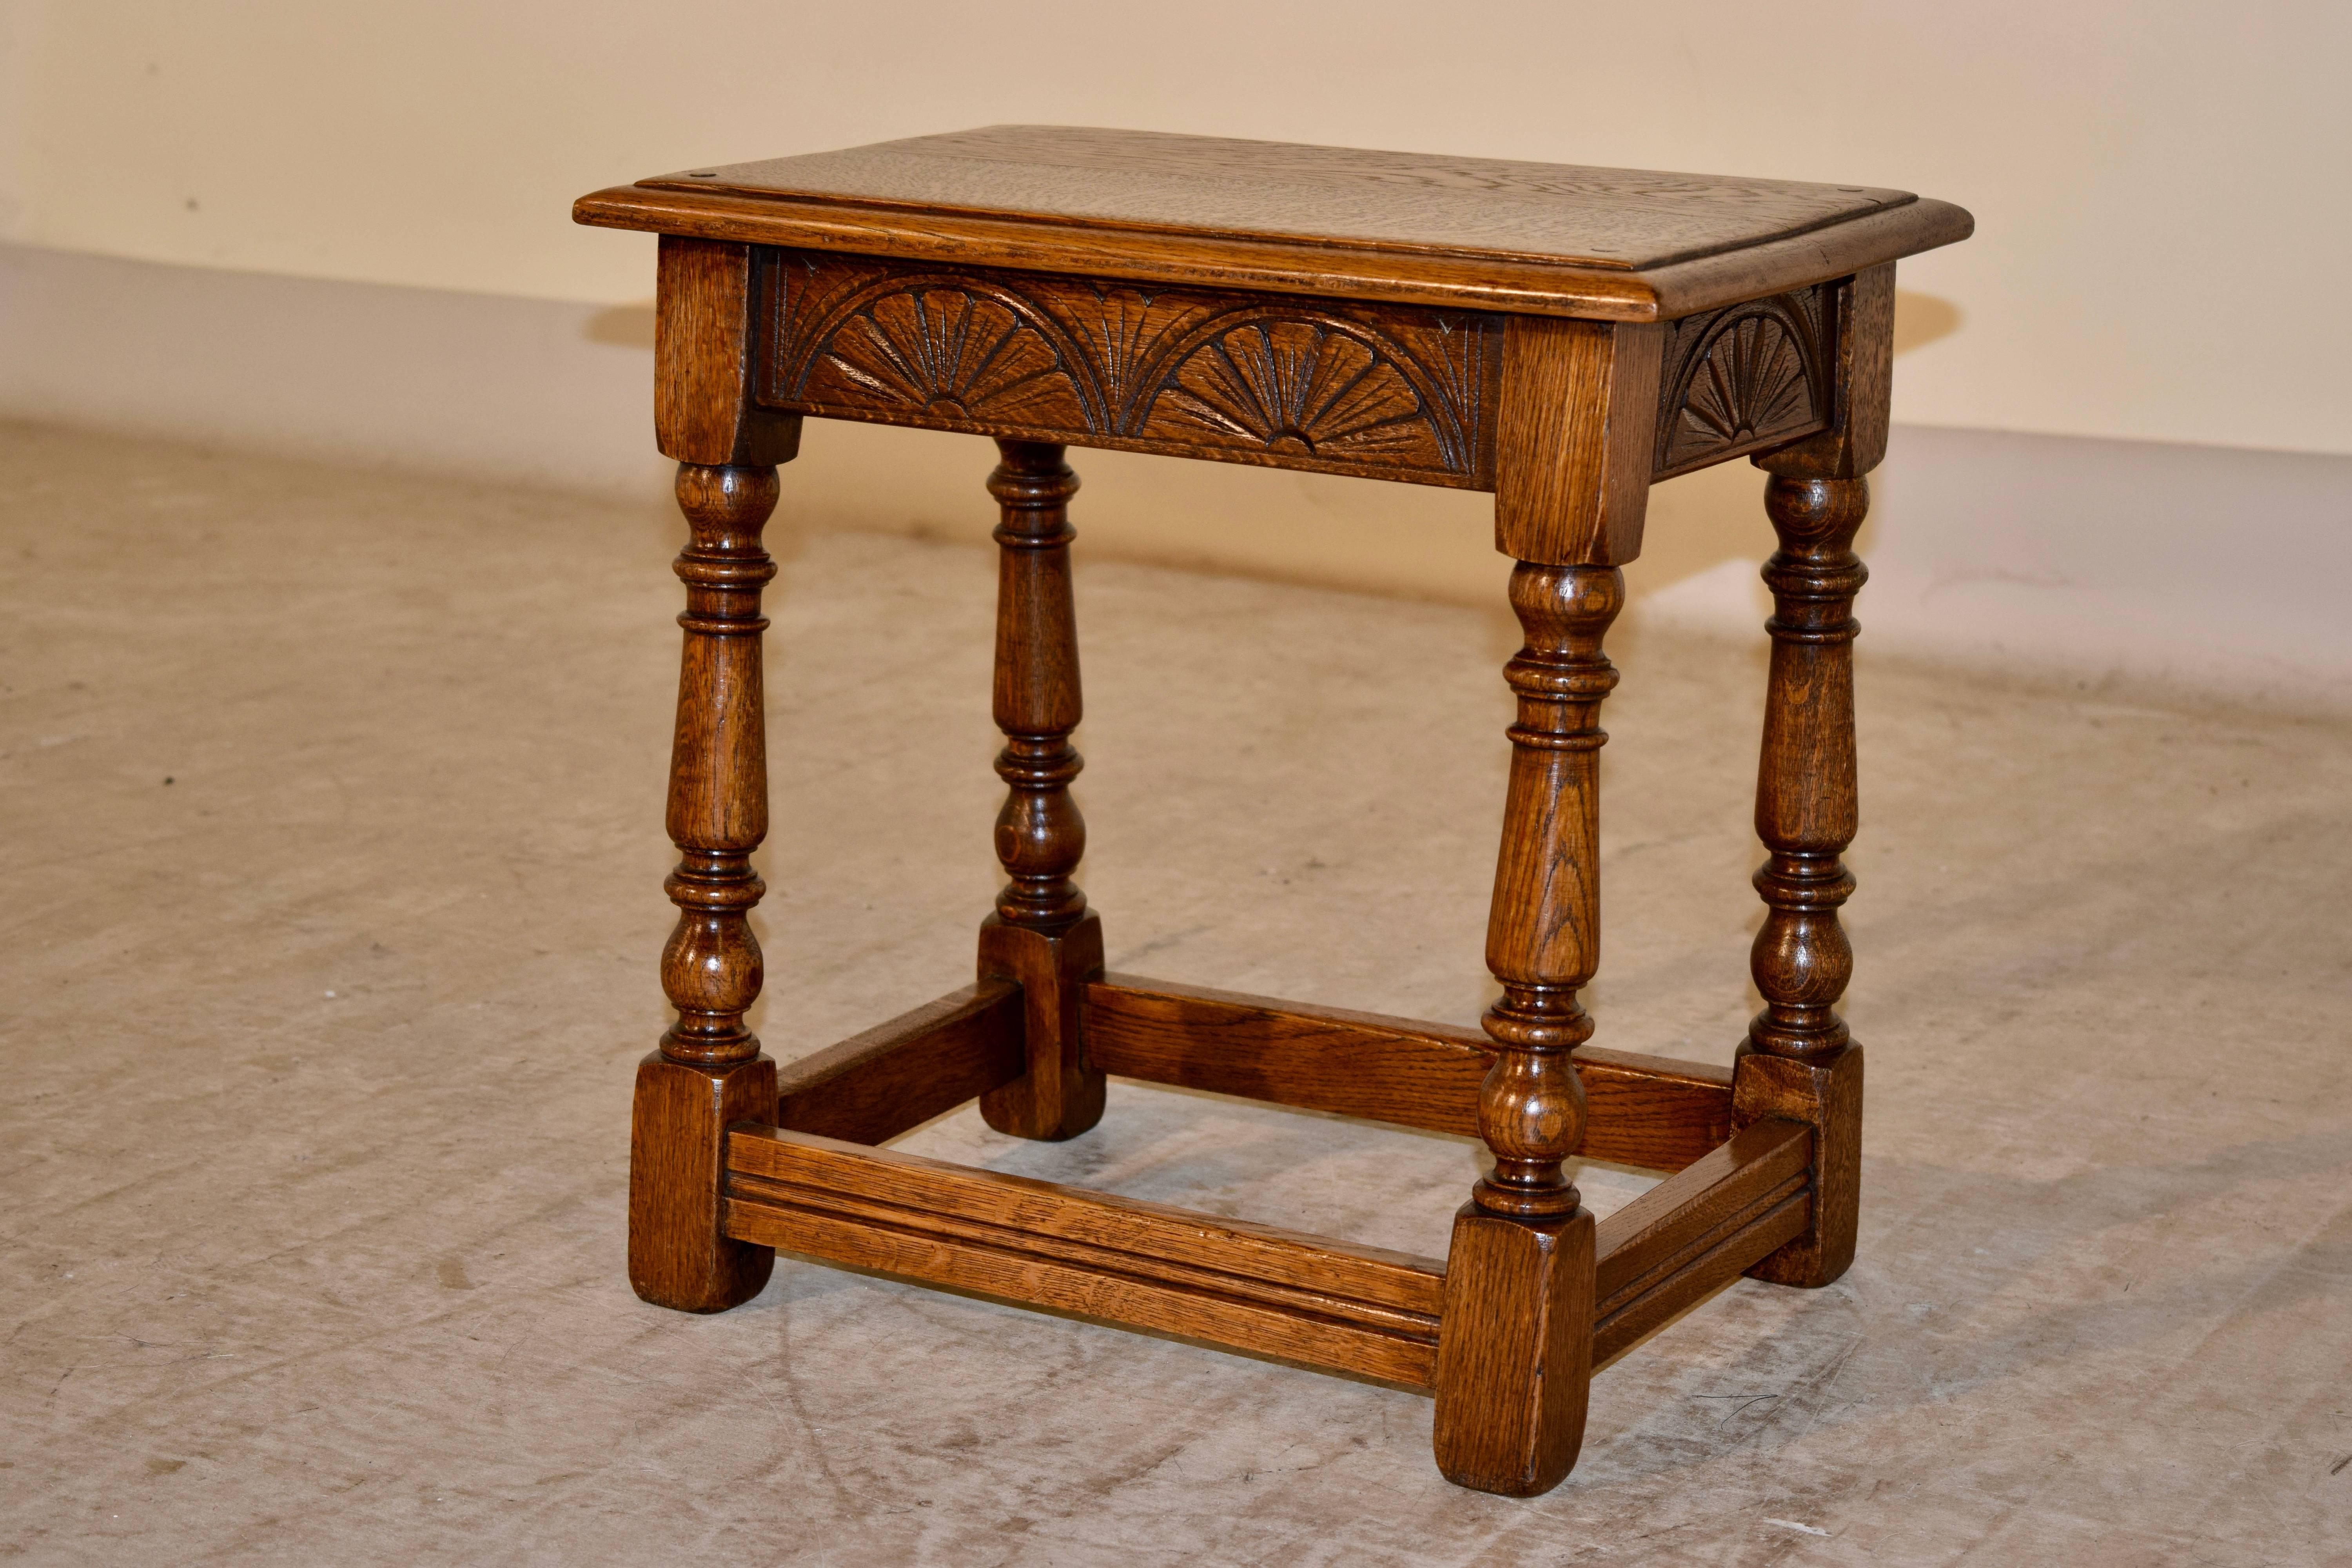 English oak joint stool, circa 1900, with a beveled edge around the top and pegged construction. It has a carved apron on all four sides, and is supported on turned legs, joined by simple stretchers.